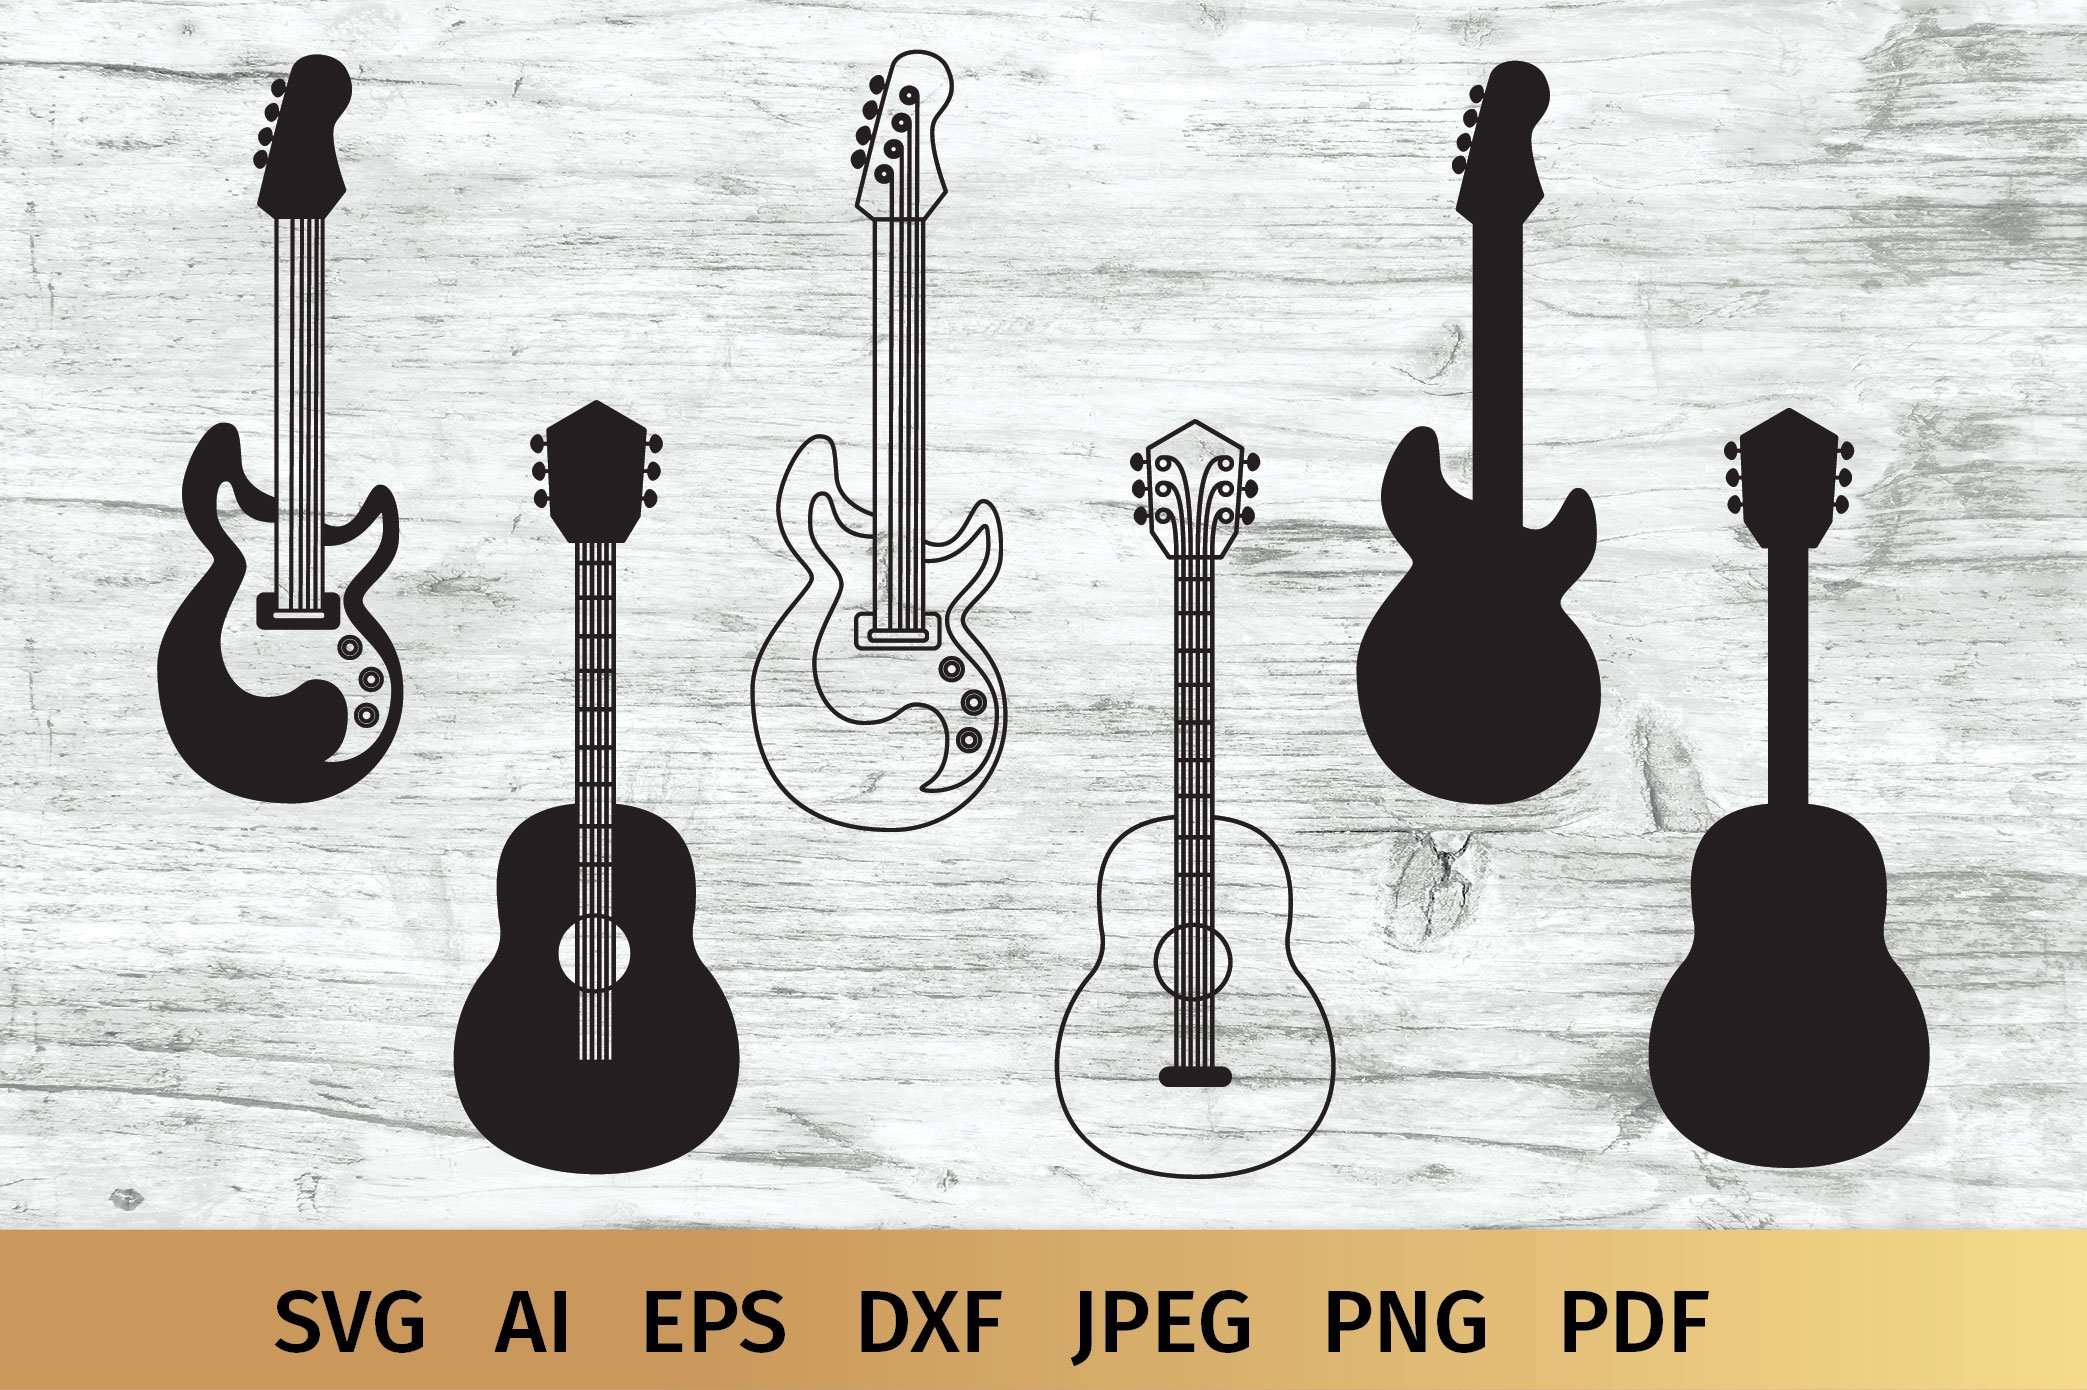 Various guitars on a wooden background.